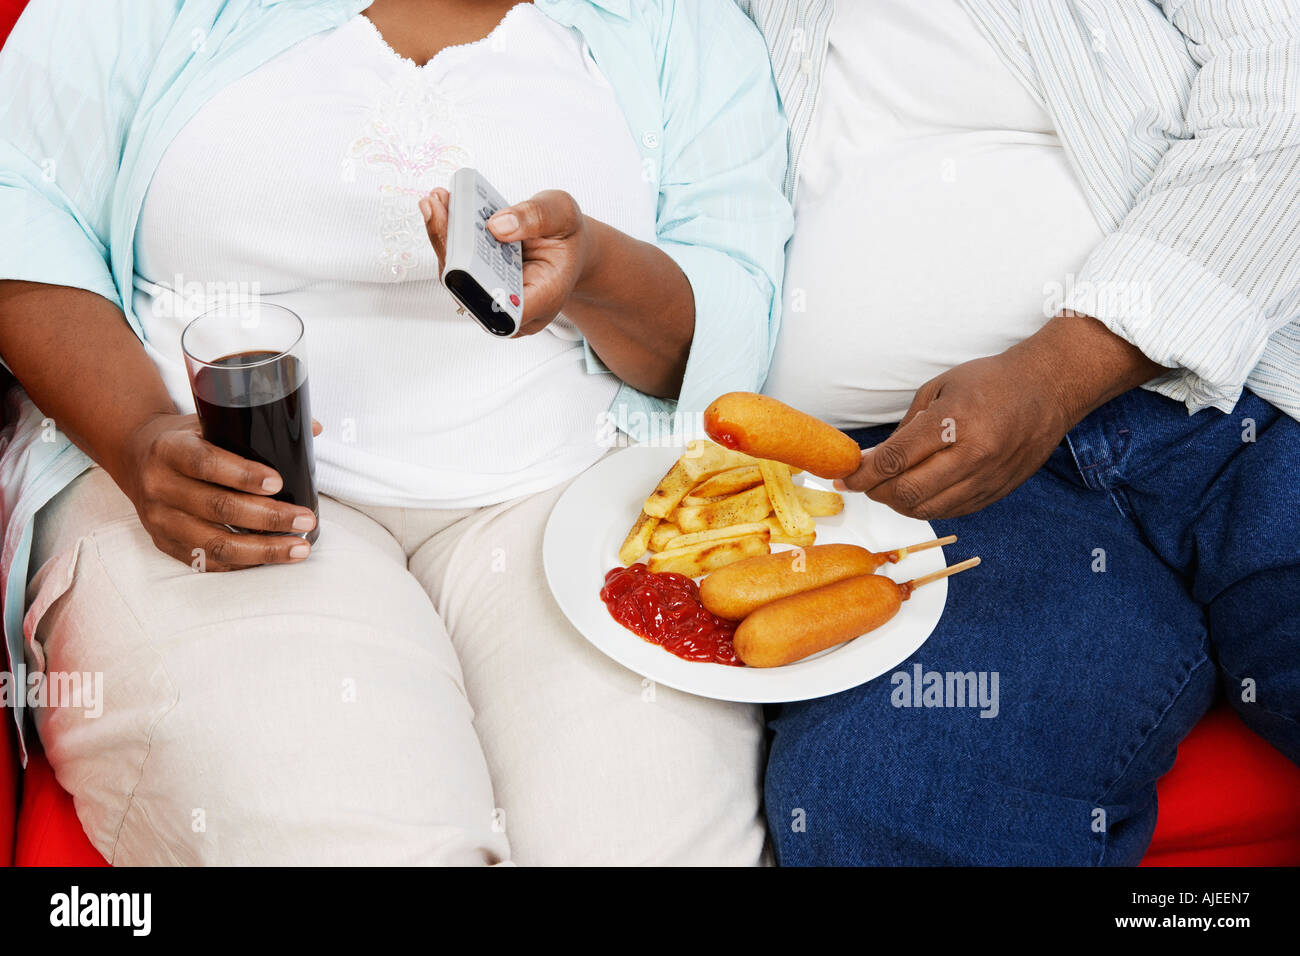 Overweight Couple, sitting, eating junk food, holding remote control, mid section Stock Photo